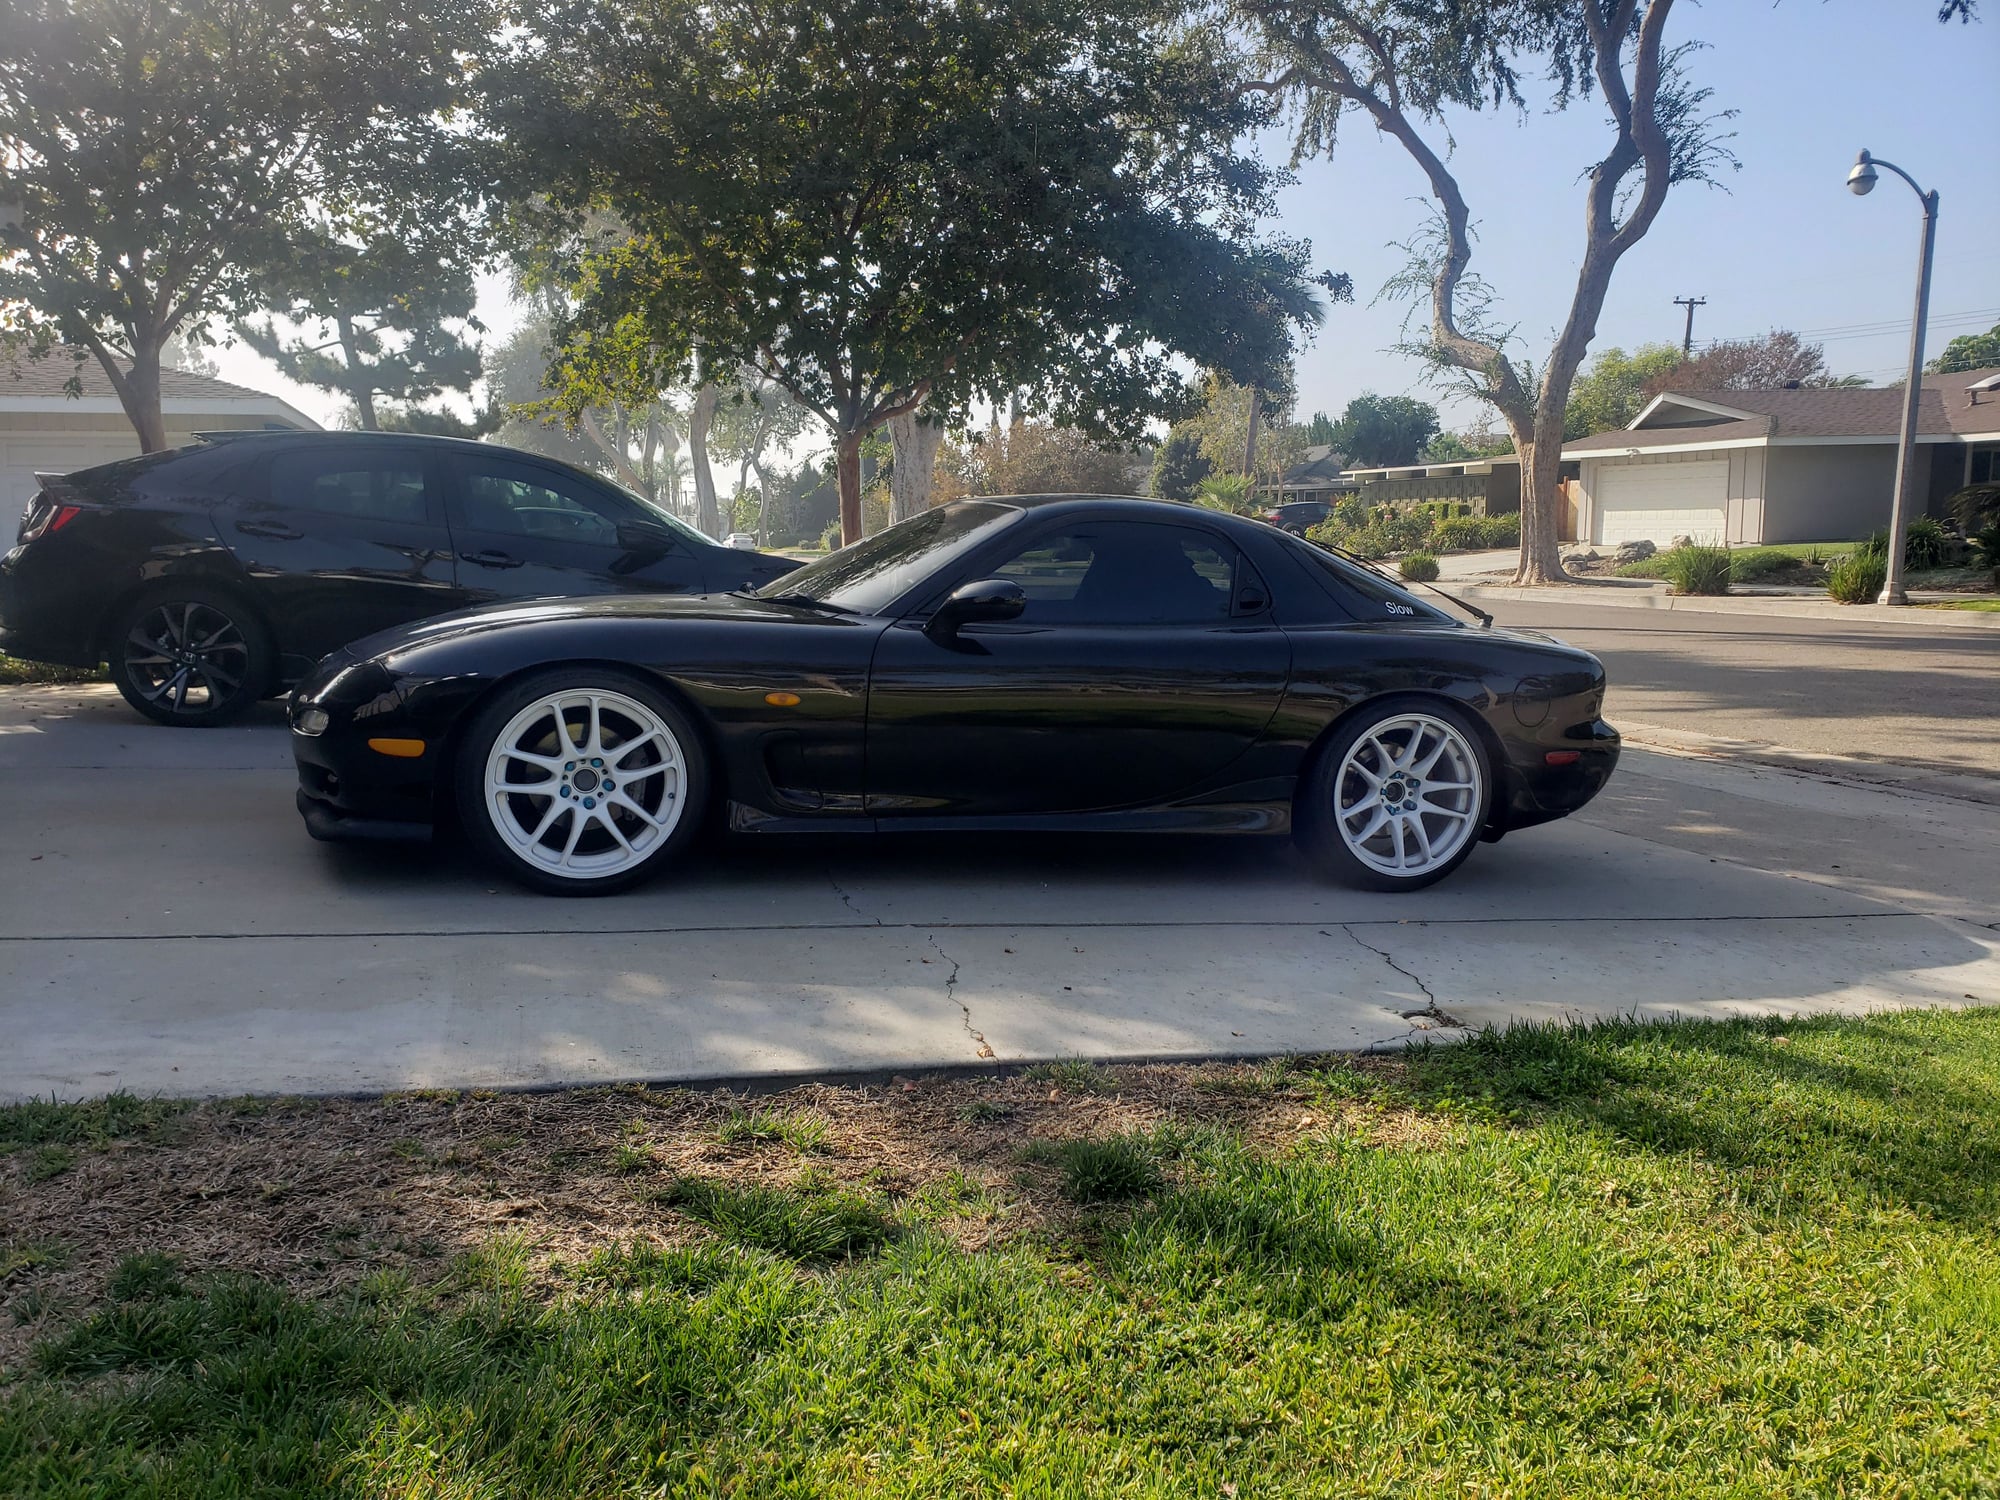 1993 Mazda RX-7 - 1992 RHD Mazda RX7 R1 - Used - VIN FD3S-109261 - Other - 2WD - Manual - Coupe - Black - Fullerton, CA 92833, United States